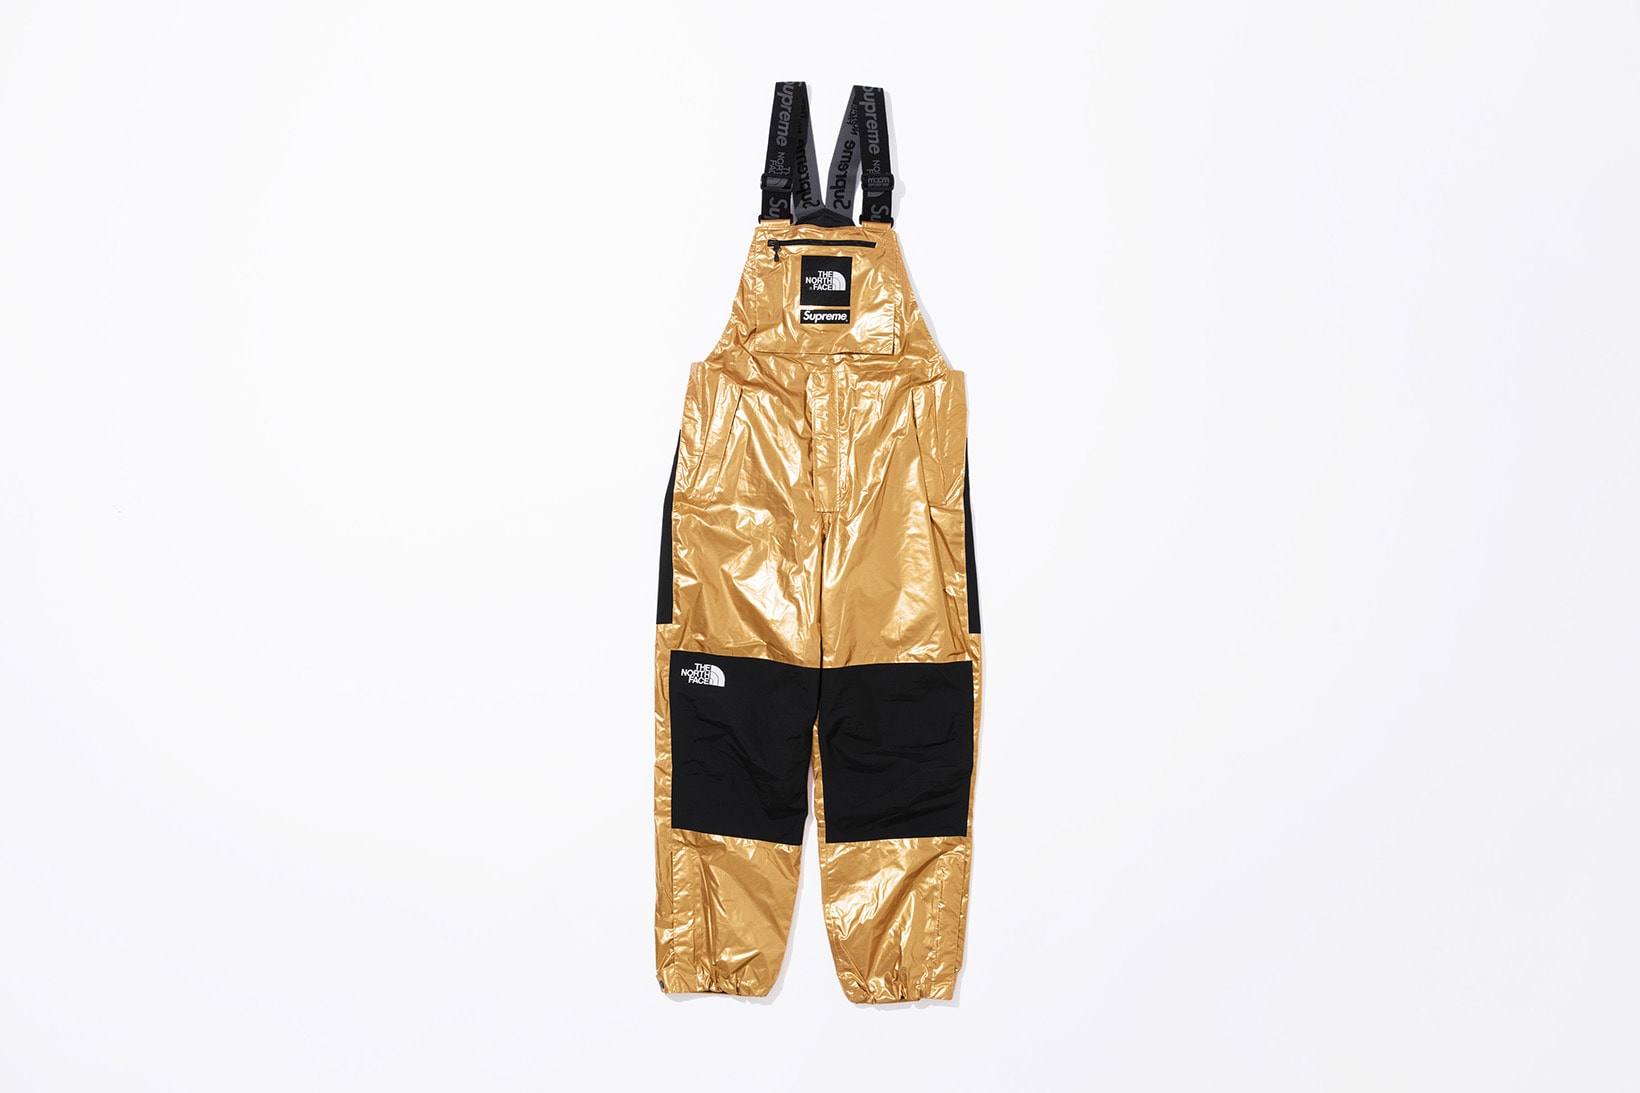 Supreme x The North Face Metallic Spring 2018 Collection Gold Silver Rose Gold Mountain Parka Roo II Bag Backpack Sling Bag Overalls Bib Pants T-Shirt Hooded Sweatshirt